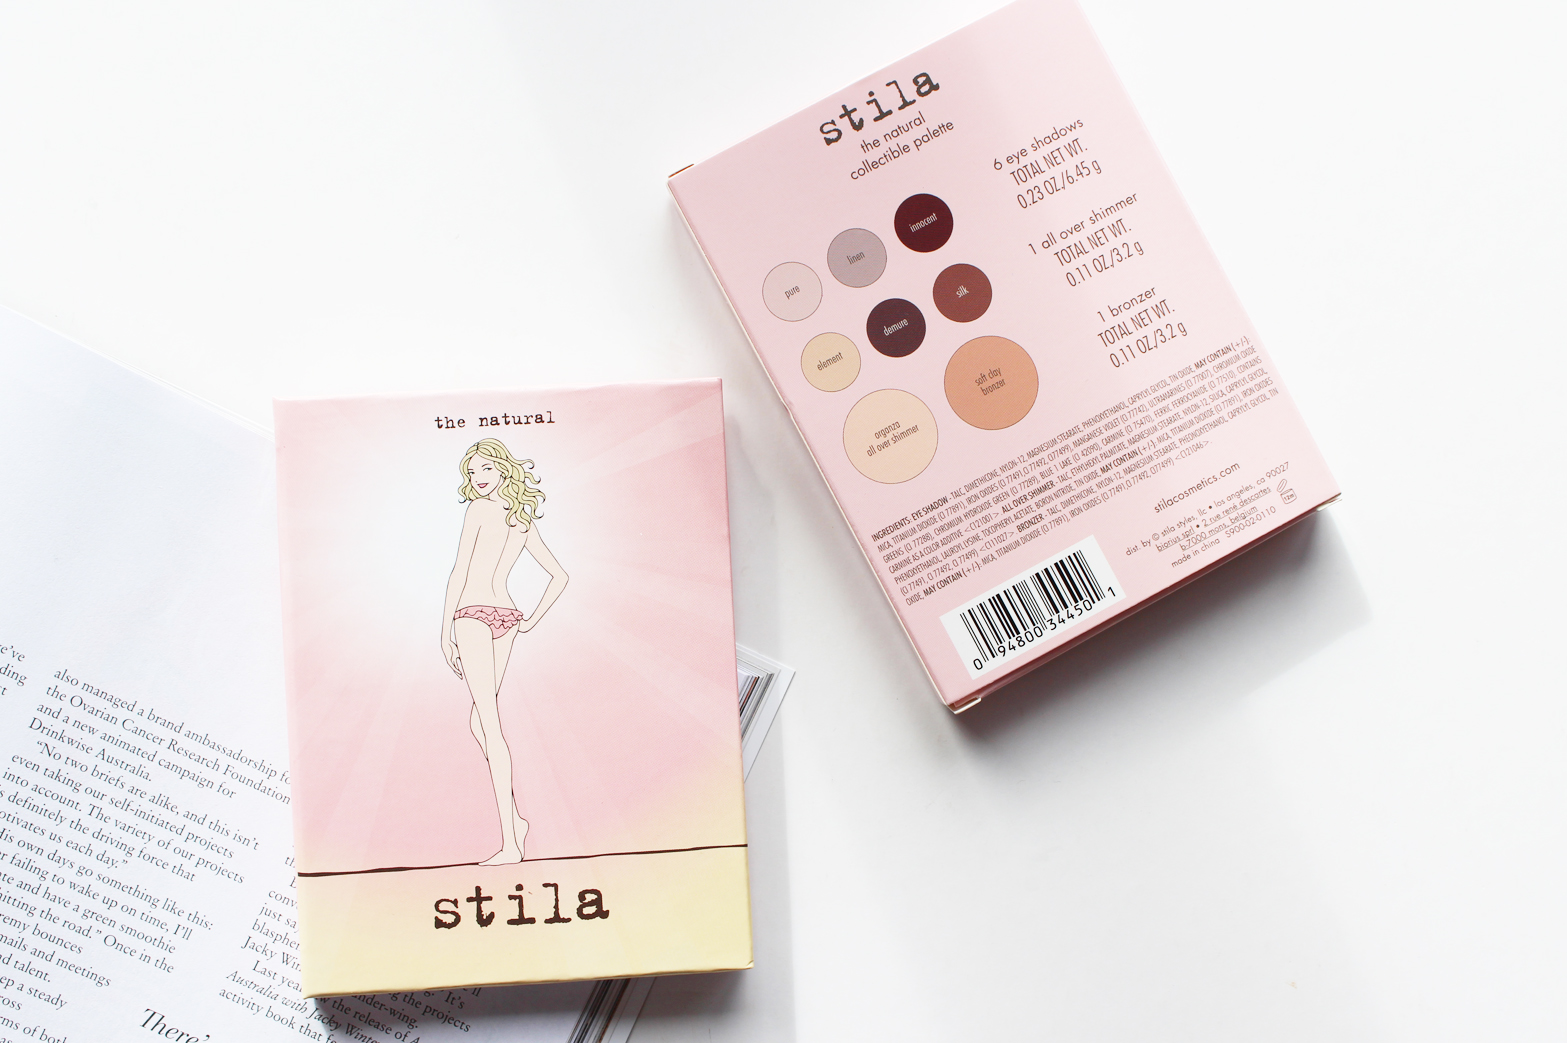 STILA | The Natural Collectible Palette - Review + Swatches - CassandraMyee